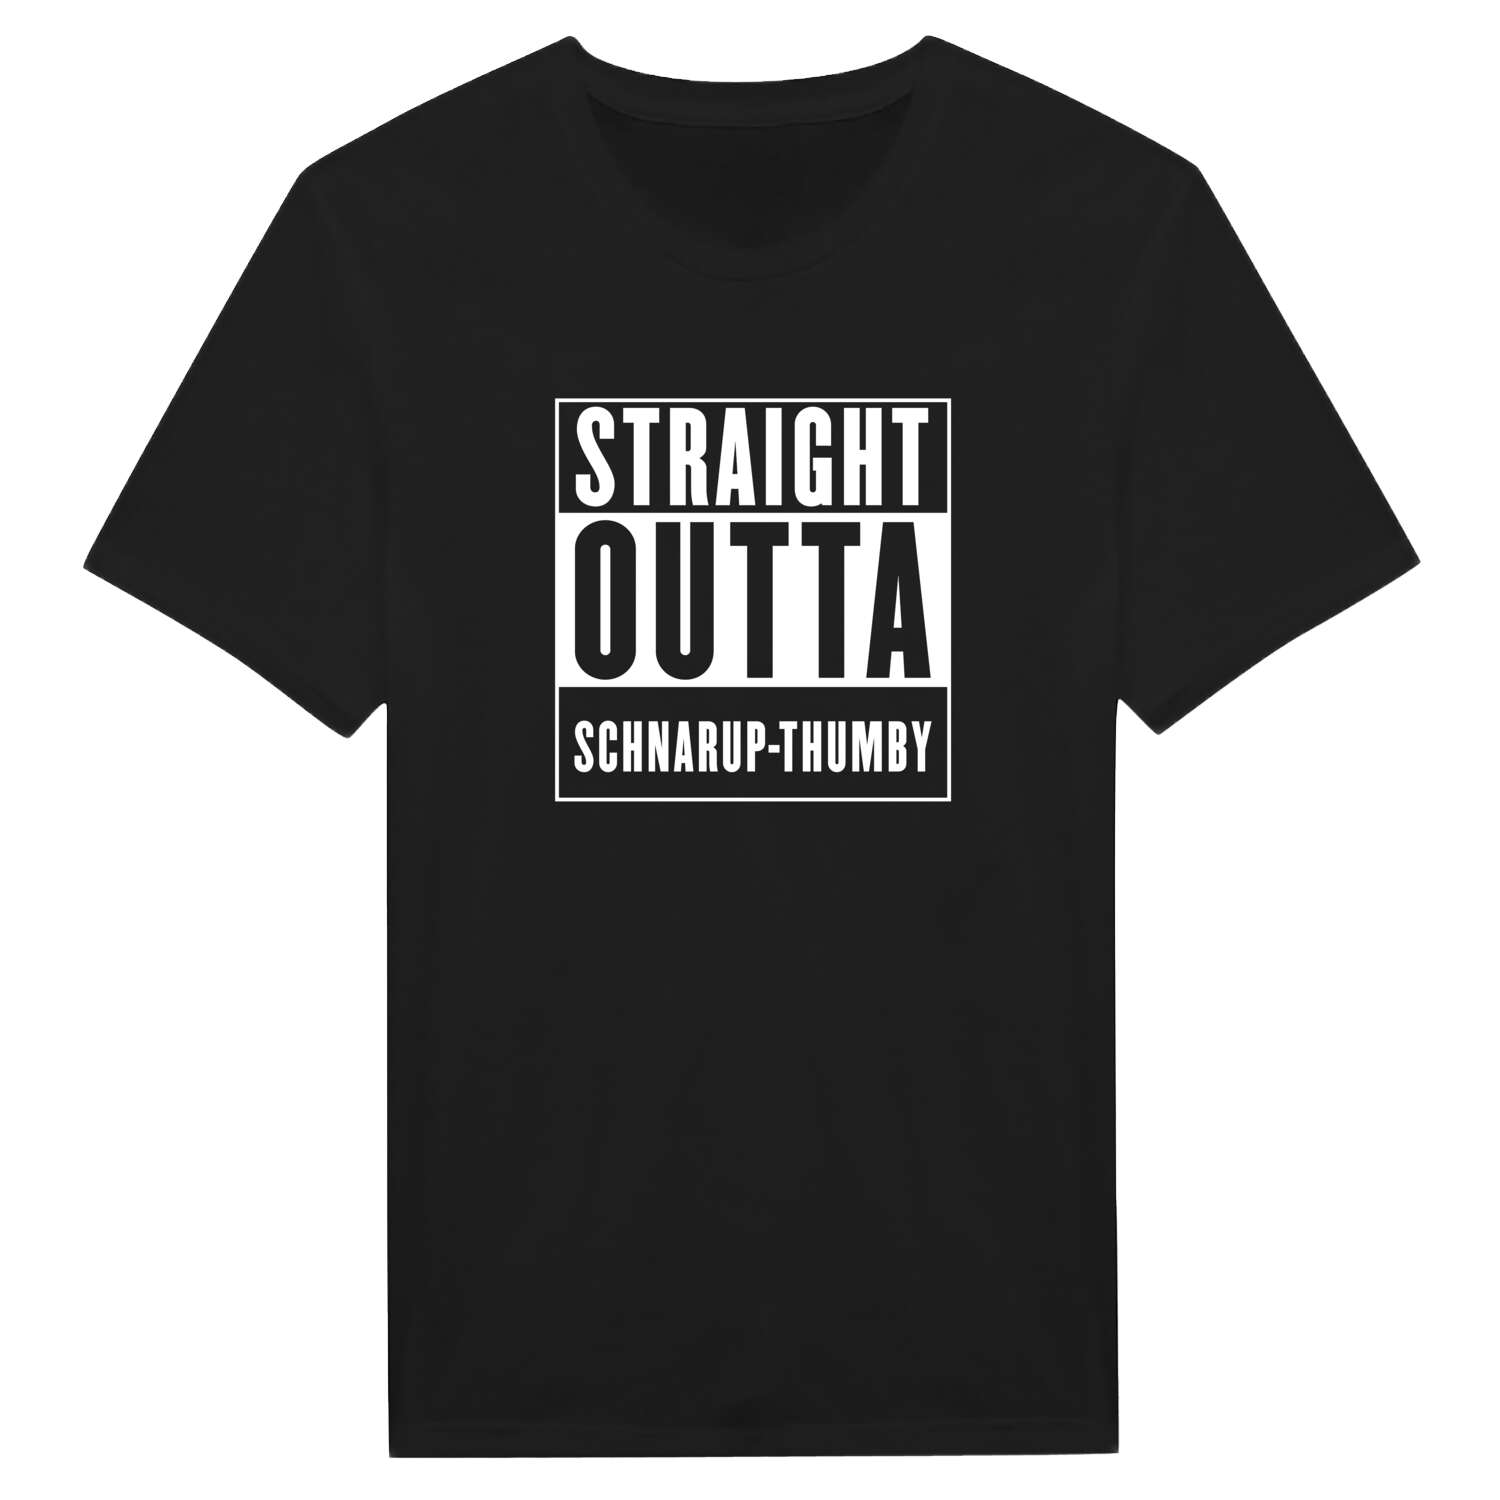 Schnarup-Thumby T-Shirt »Straight Outta«